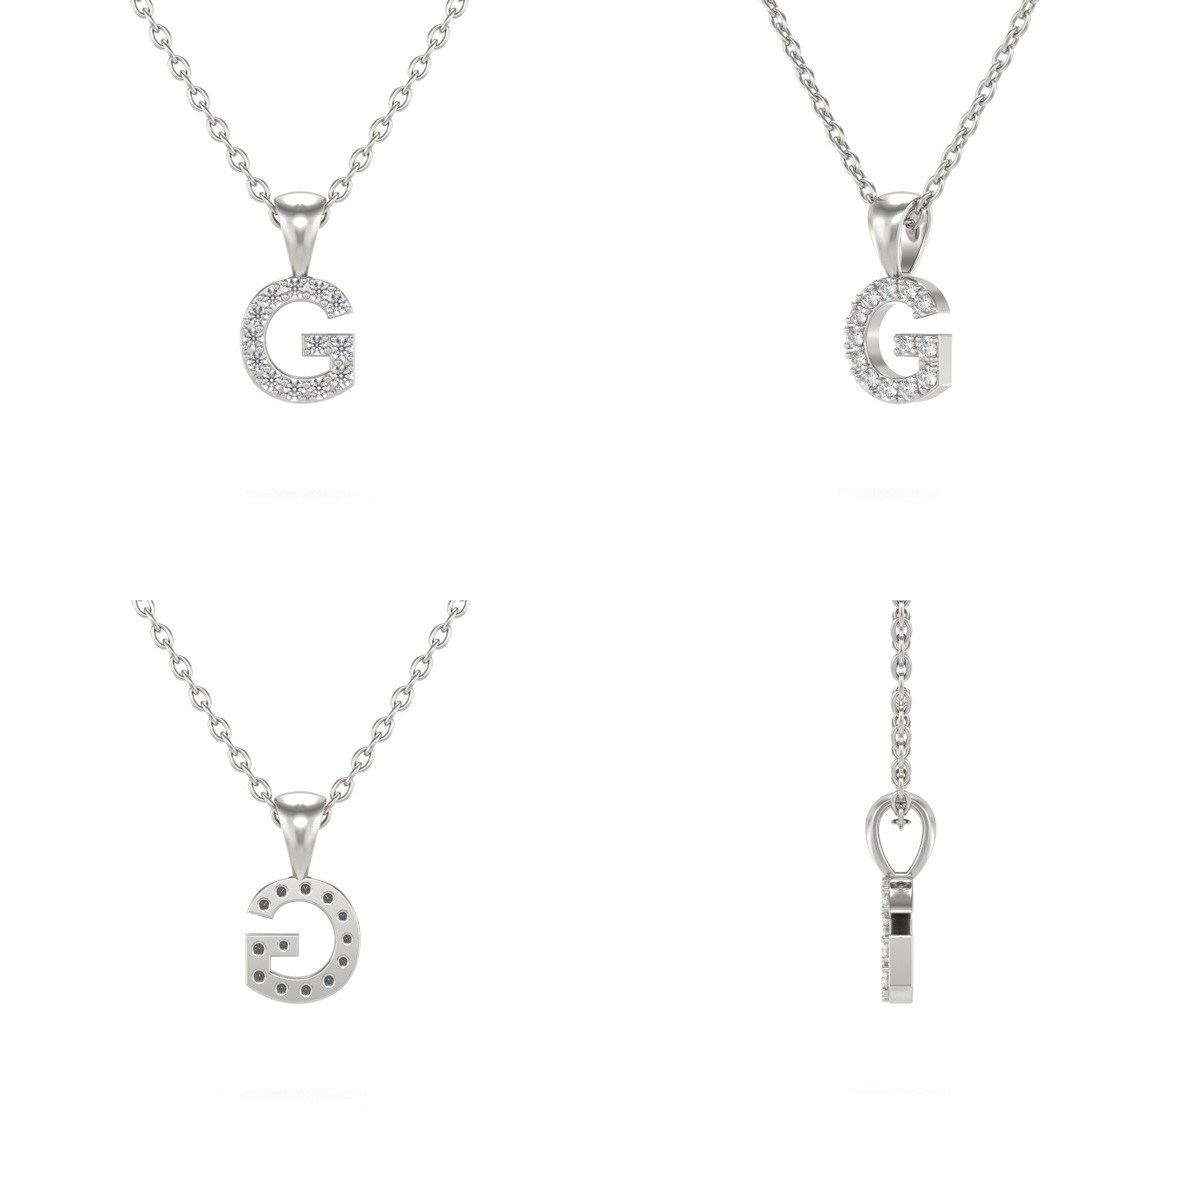 Collier Pendentif ADEN Lettre G Or 750 Blanc Diamant Chaine Or 750 incluse 0.72grs - vue 2